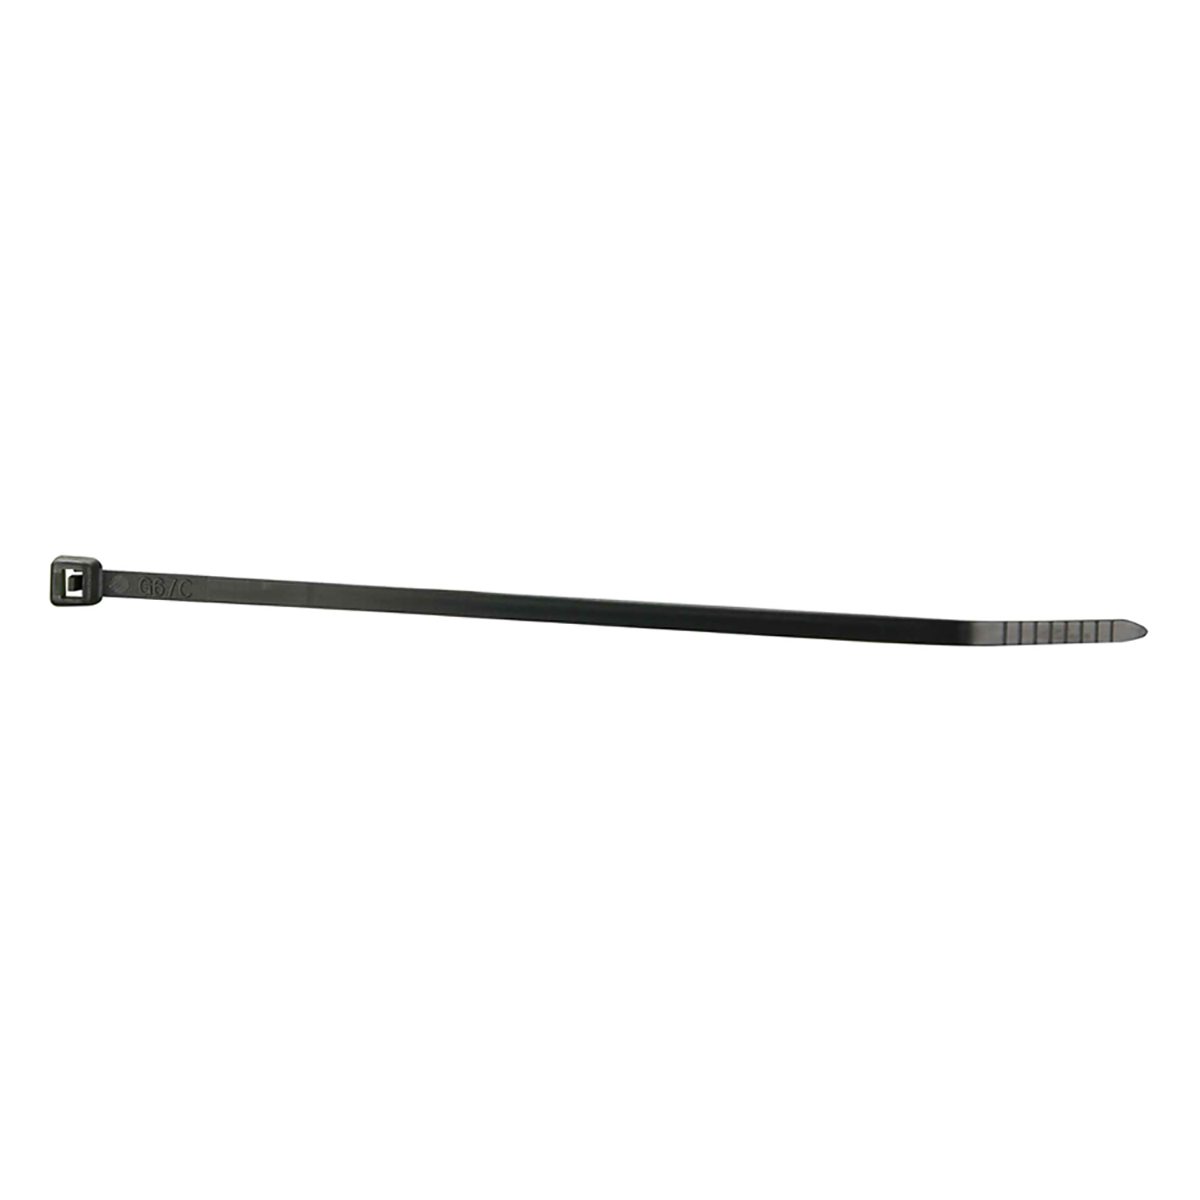 Cable Ties 14 in. Black 50 Lb 100Pk